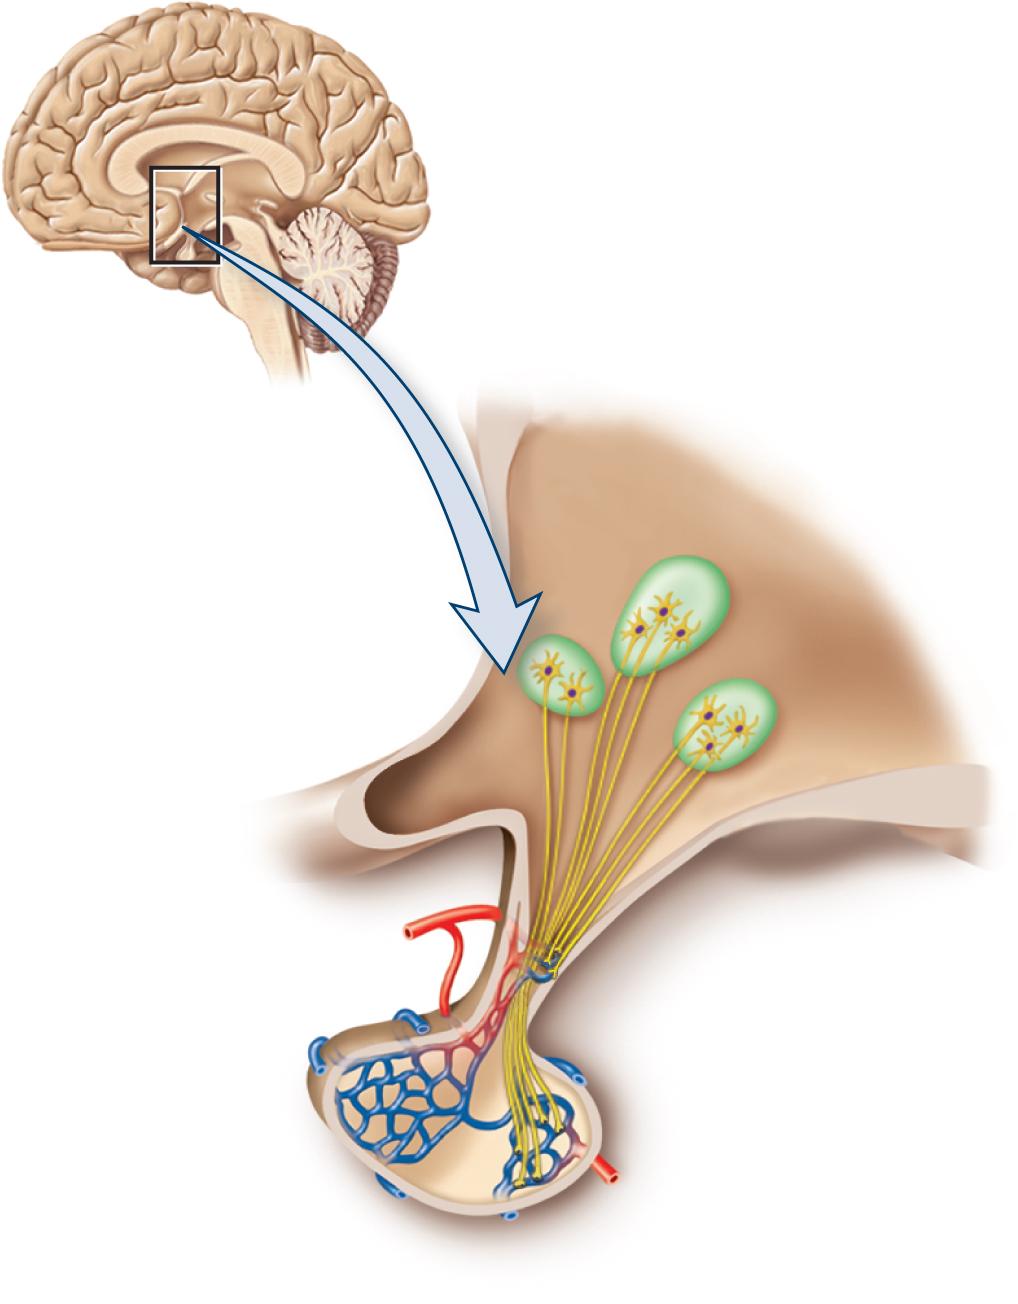 Link between Endocrine system and Nerve system Hypothalamus (시상하부) Pituitary (뇌하수체) Hypothalamus Hypothalamic nuclei 1) make